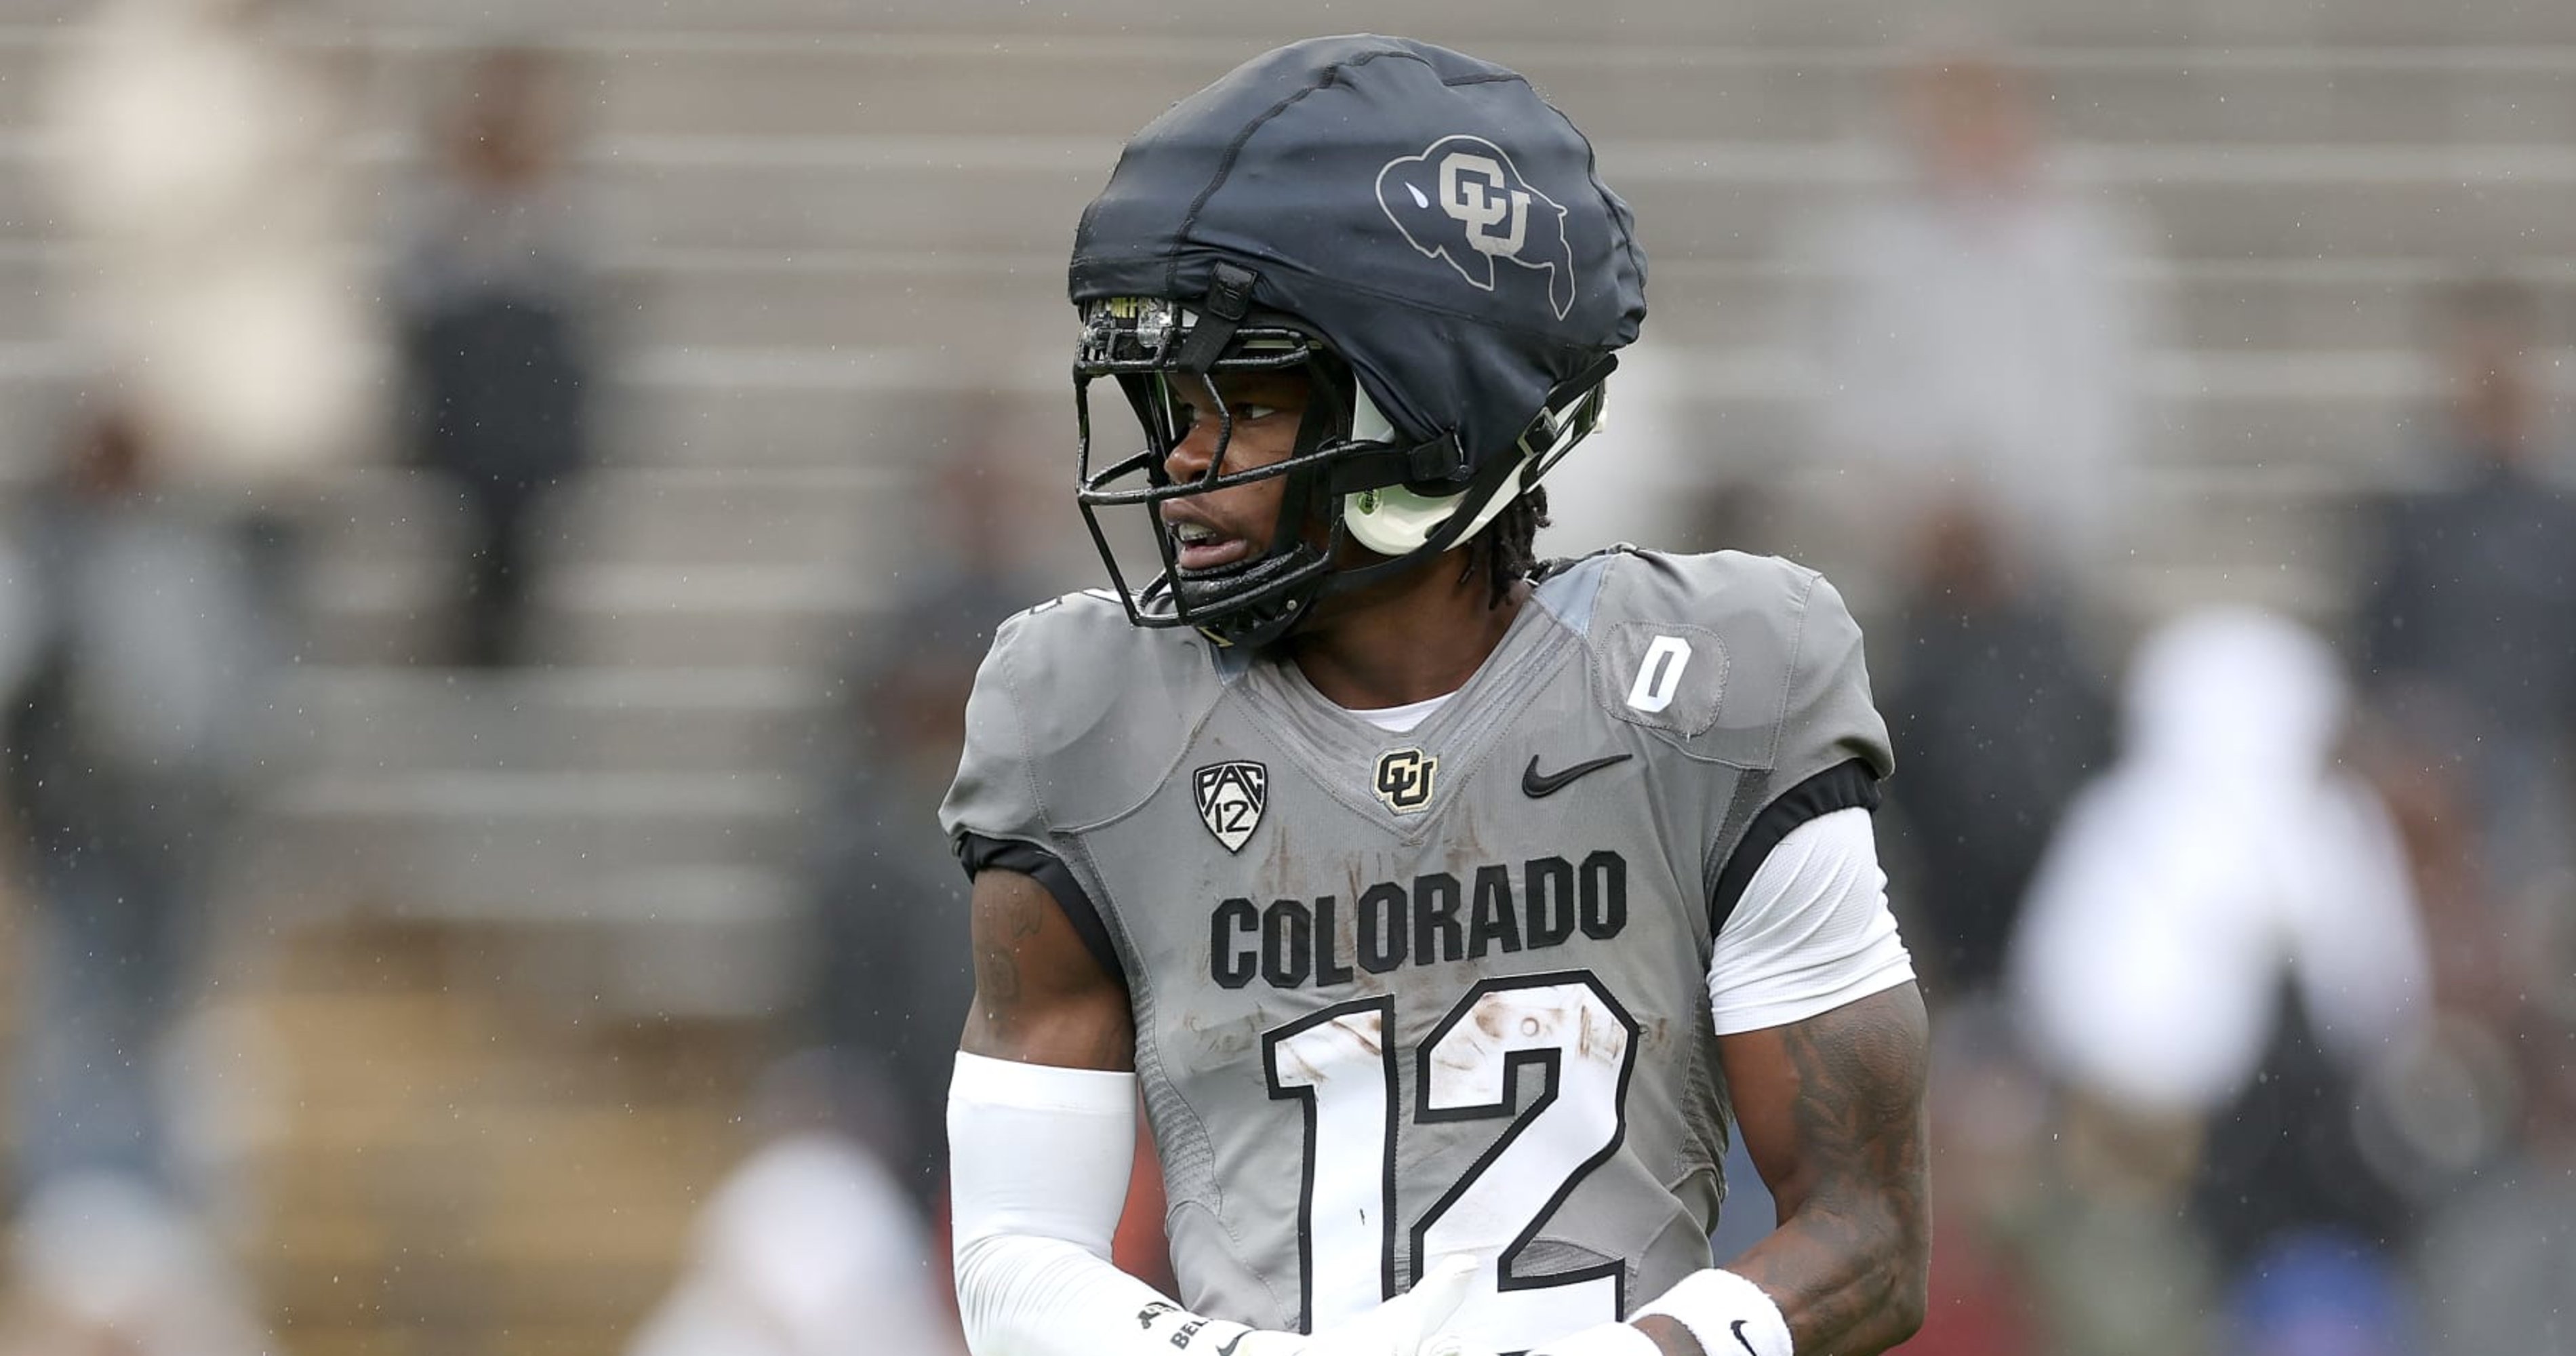 Video: Colorado's Travis Hunter Previews College Football 25 Ahead of Release Date